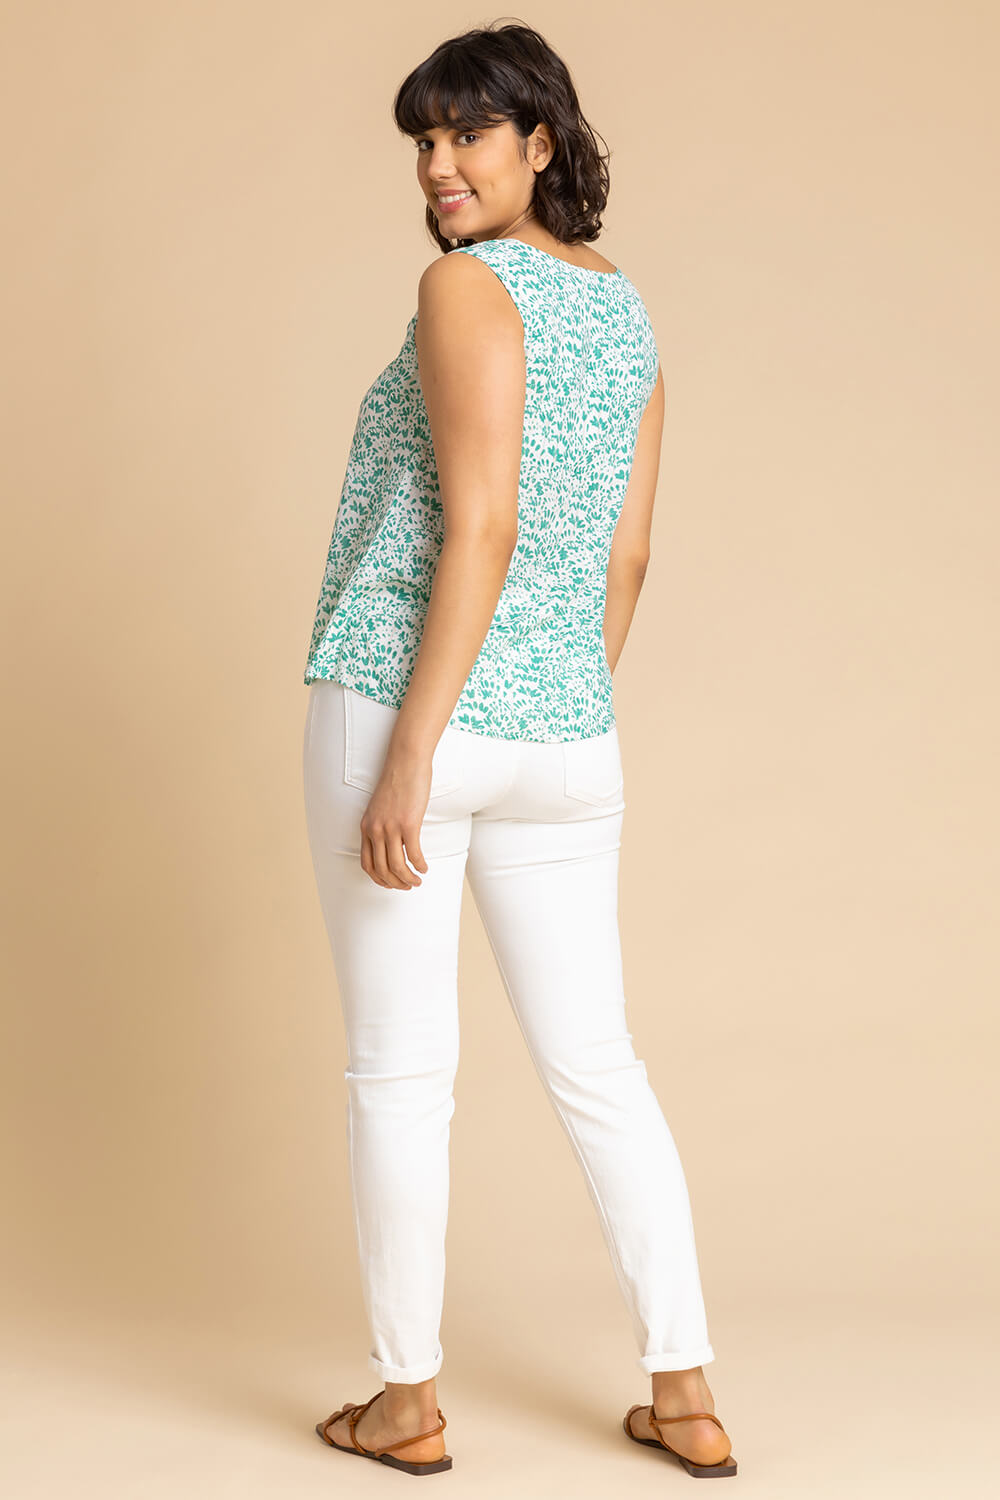 Mint Ditsy Print Pleat Front Cami Top, Image 2 of 4